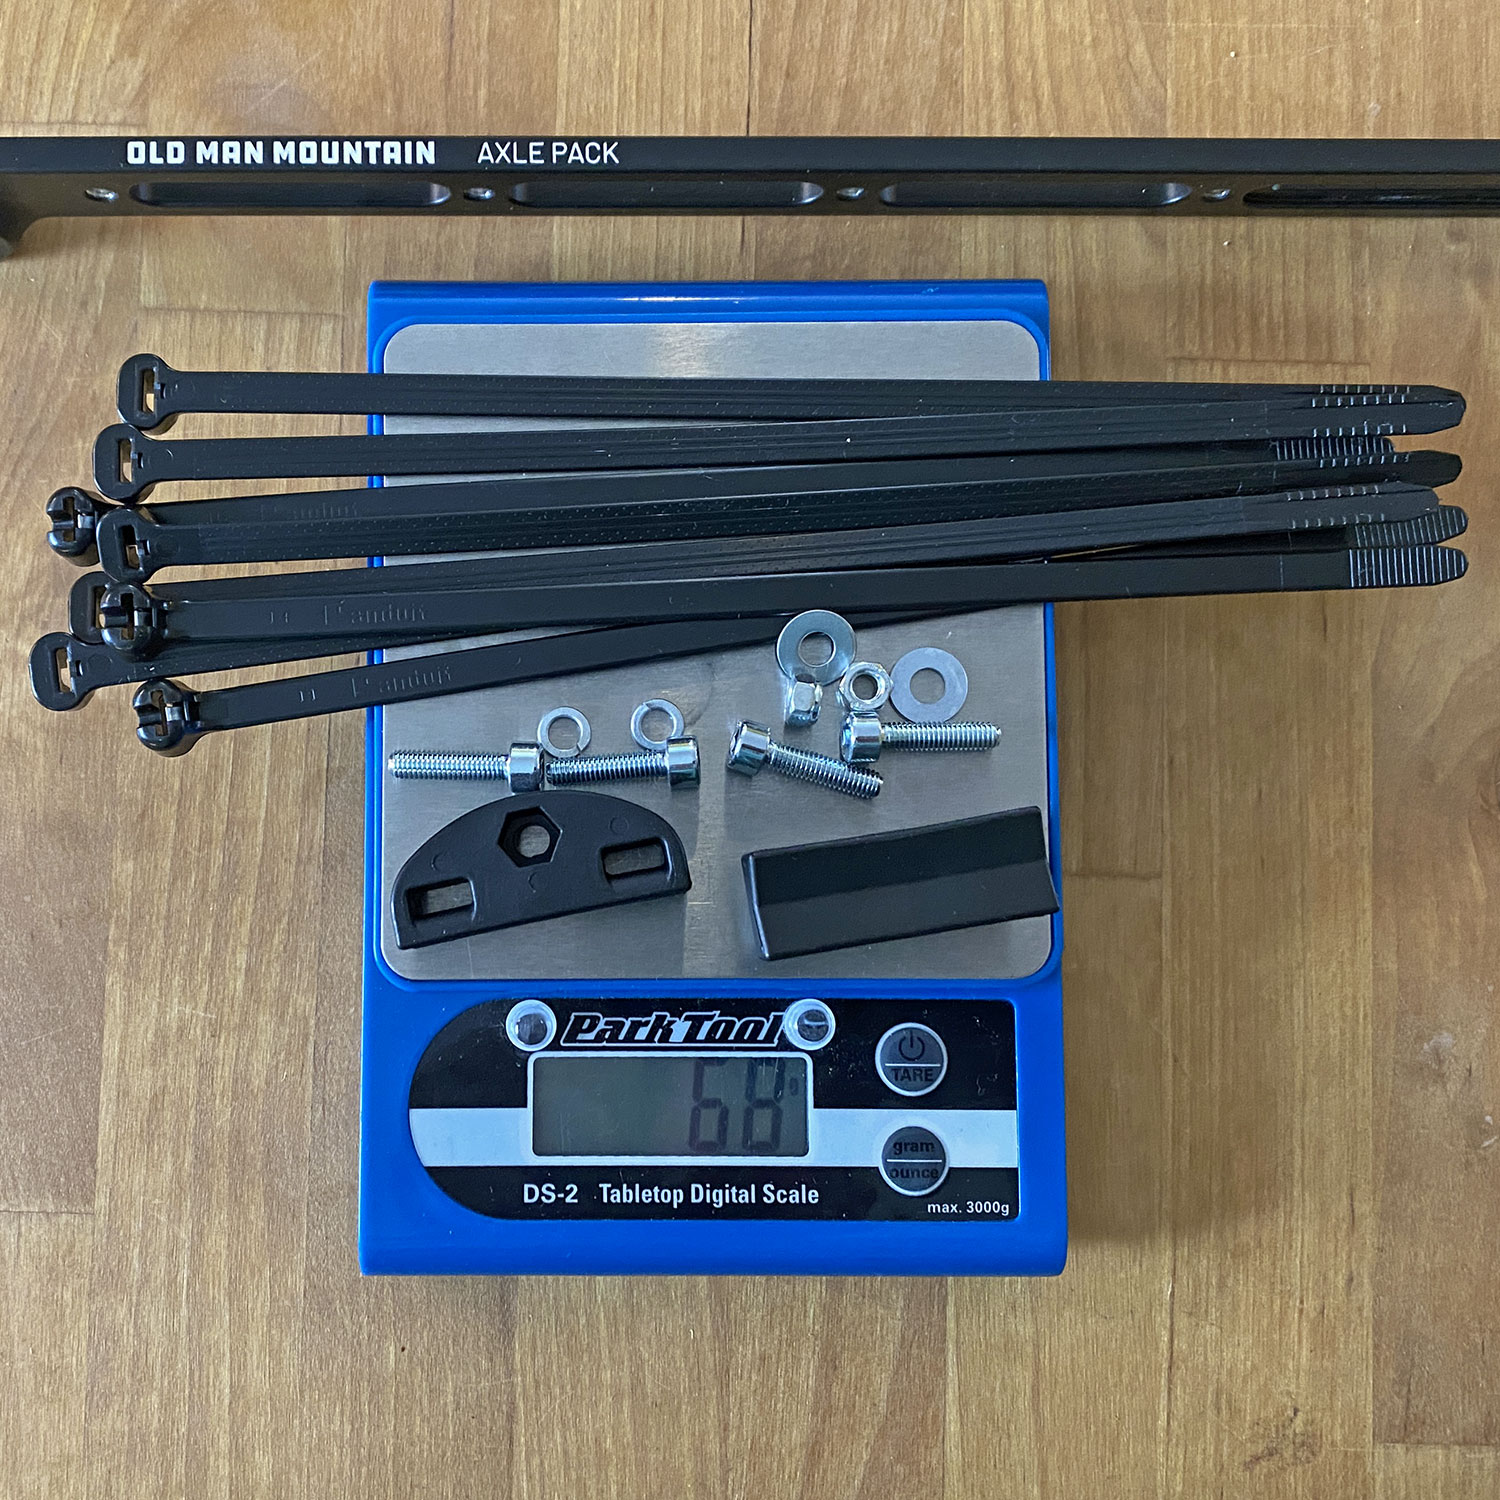 First Impressions Review: Old Man Mountain Axle Pack bolt-on fork anything cage accessory mount adapter, Fit Kit mounts, 68g